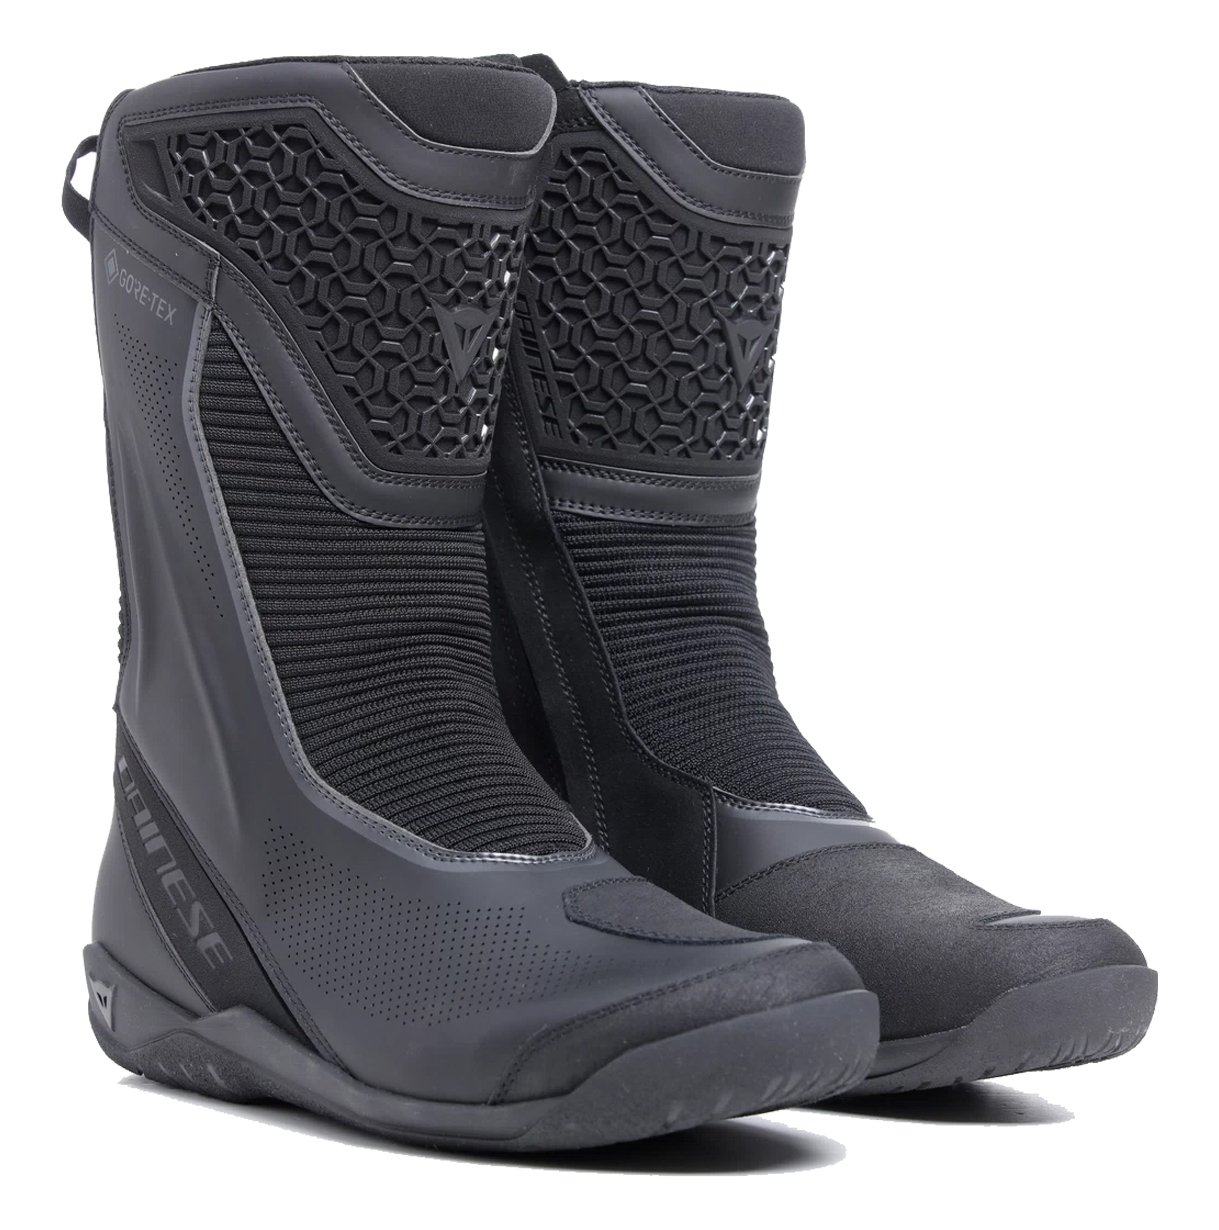 Image of Dainese Freeland 2 Gore-Tex Boots Black Size 42 ID 8051019692610